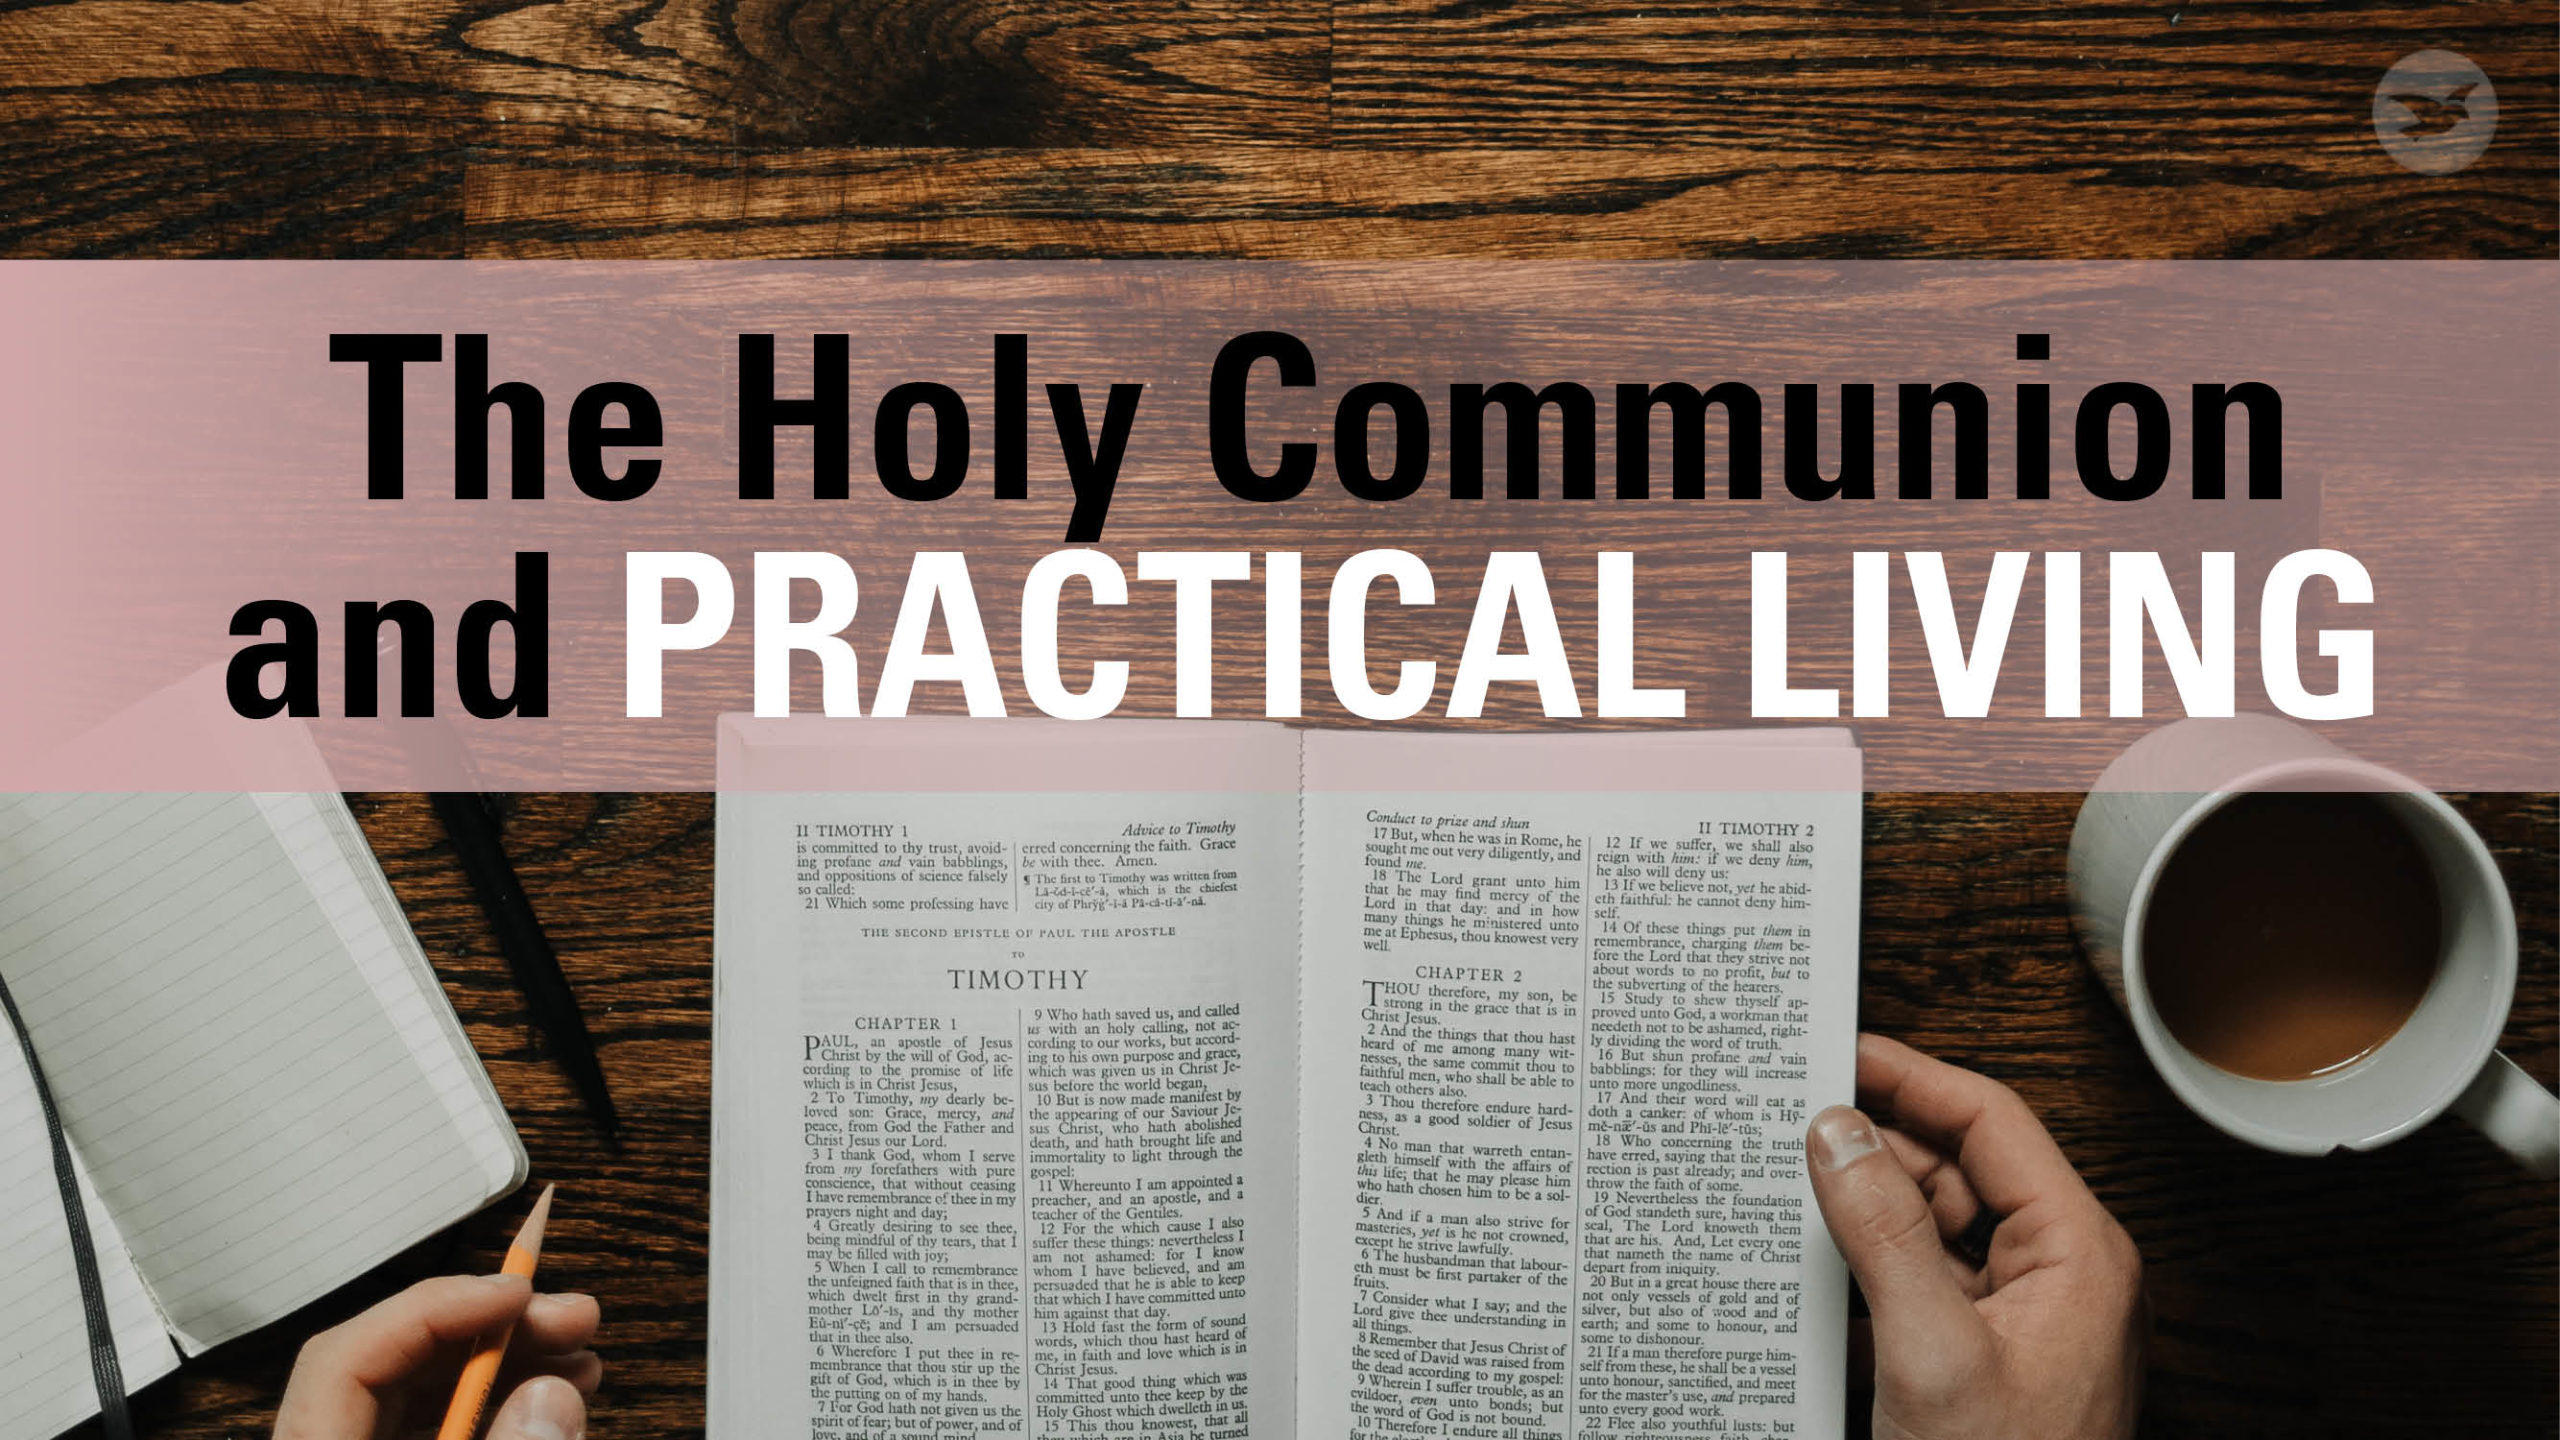 Behind the Holy Communion are practical teachings that extend to our daily lives as believers. Watch this video and learn what the Bible says about how we are to live out the meaning of the sacrament.